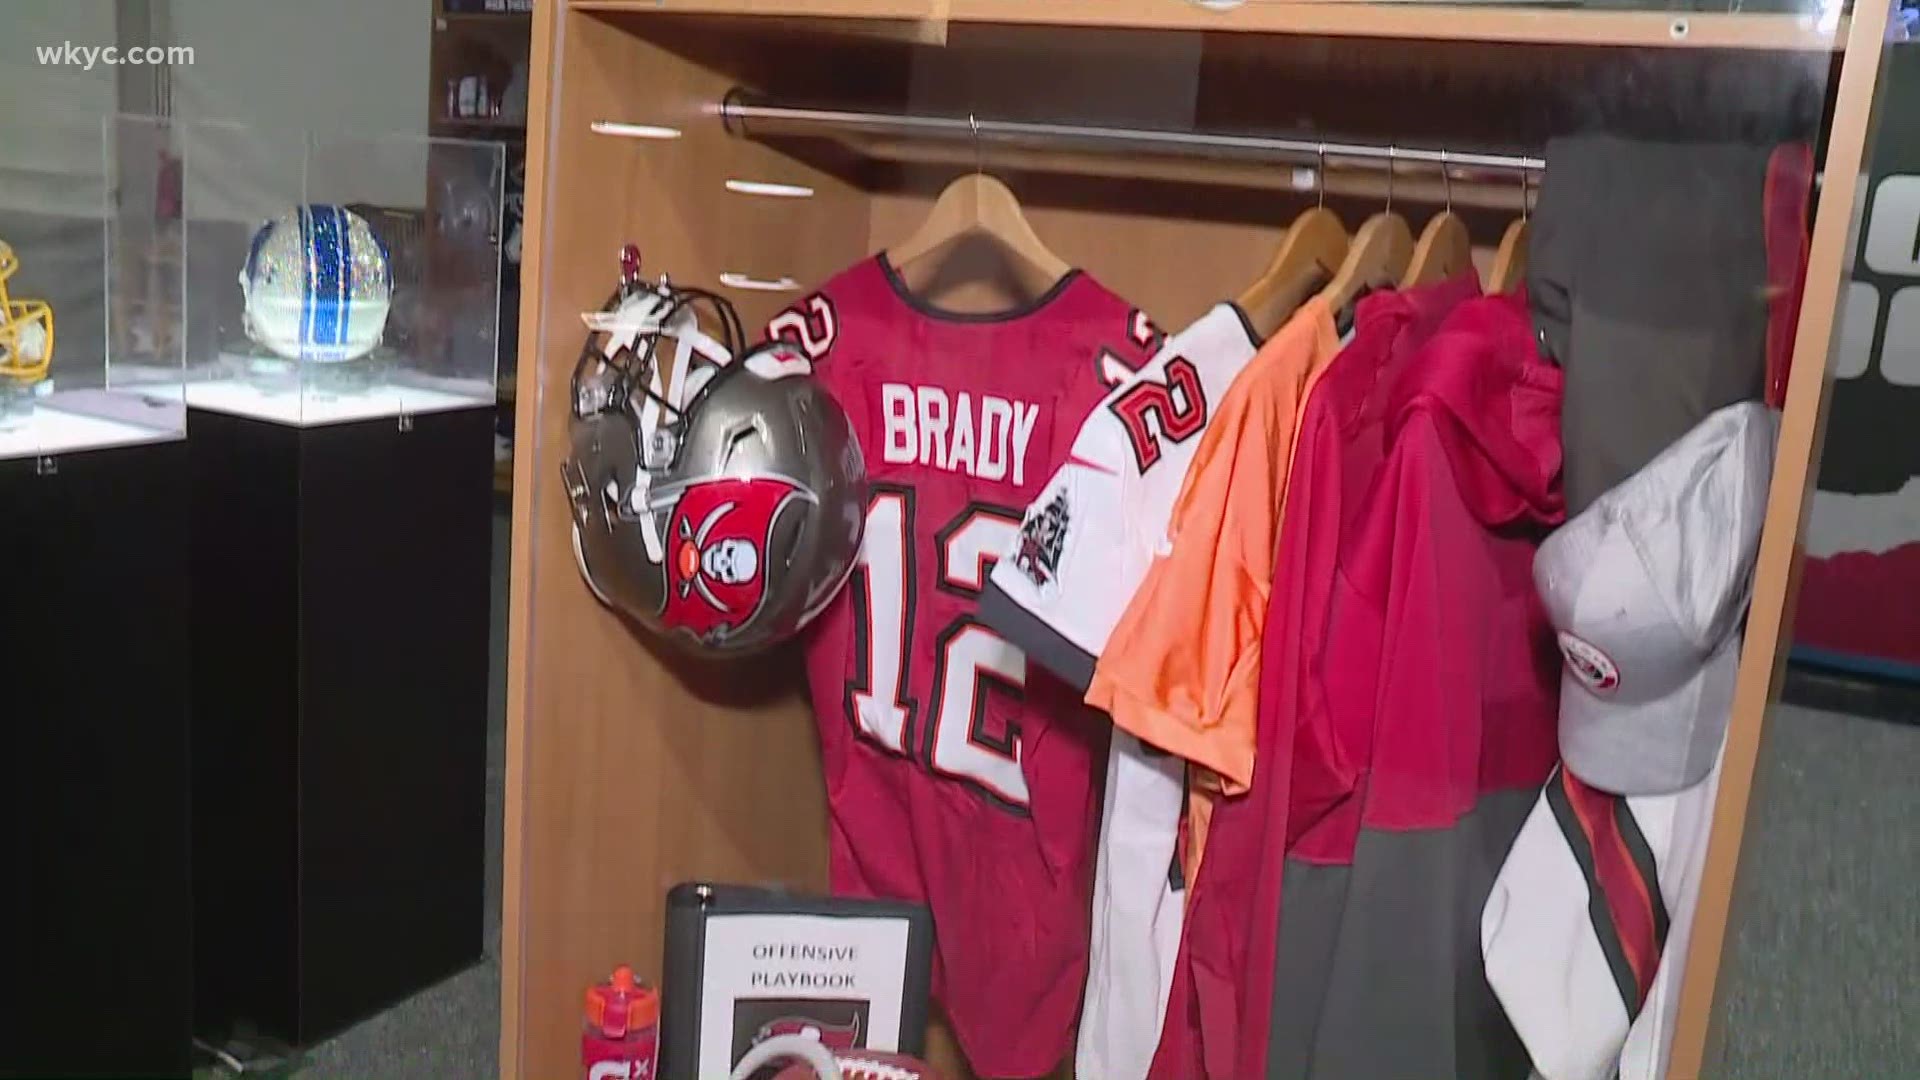 The NFL Draft Experience offers fans a chance to visit a replica locker room as it appears on game day.